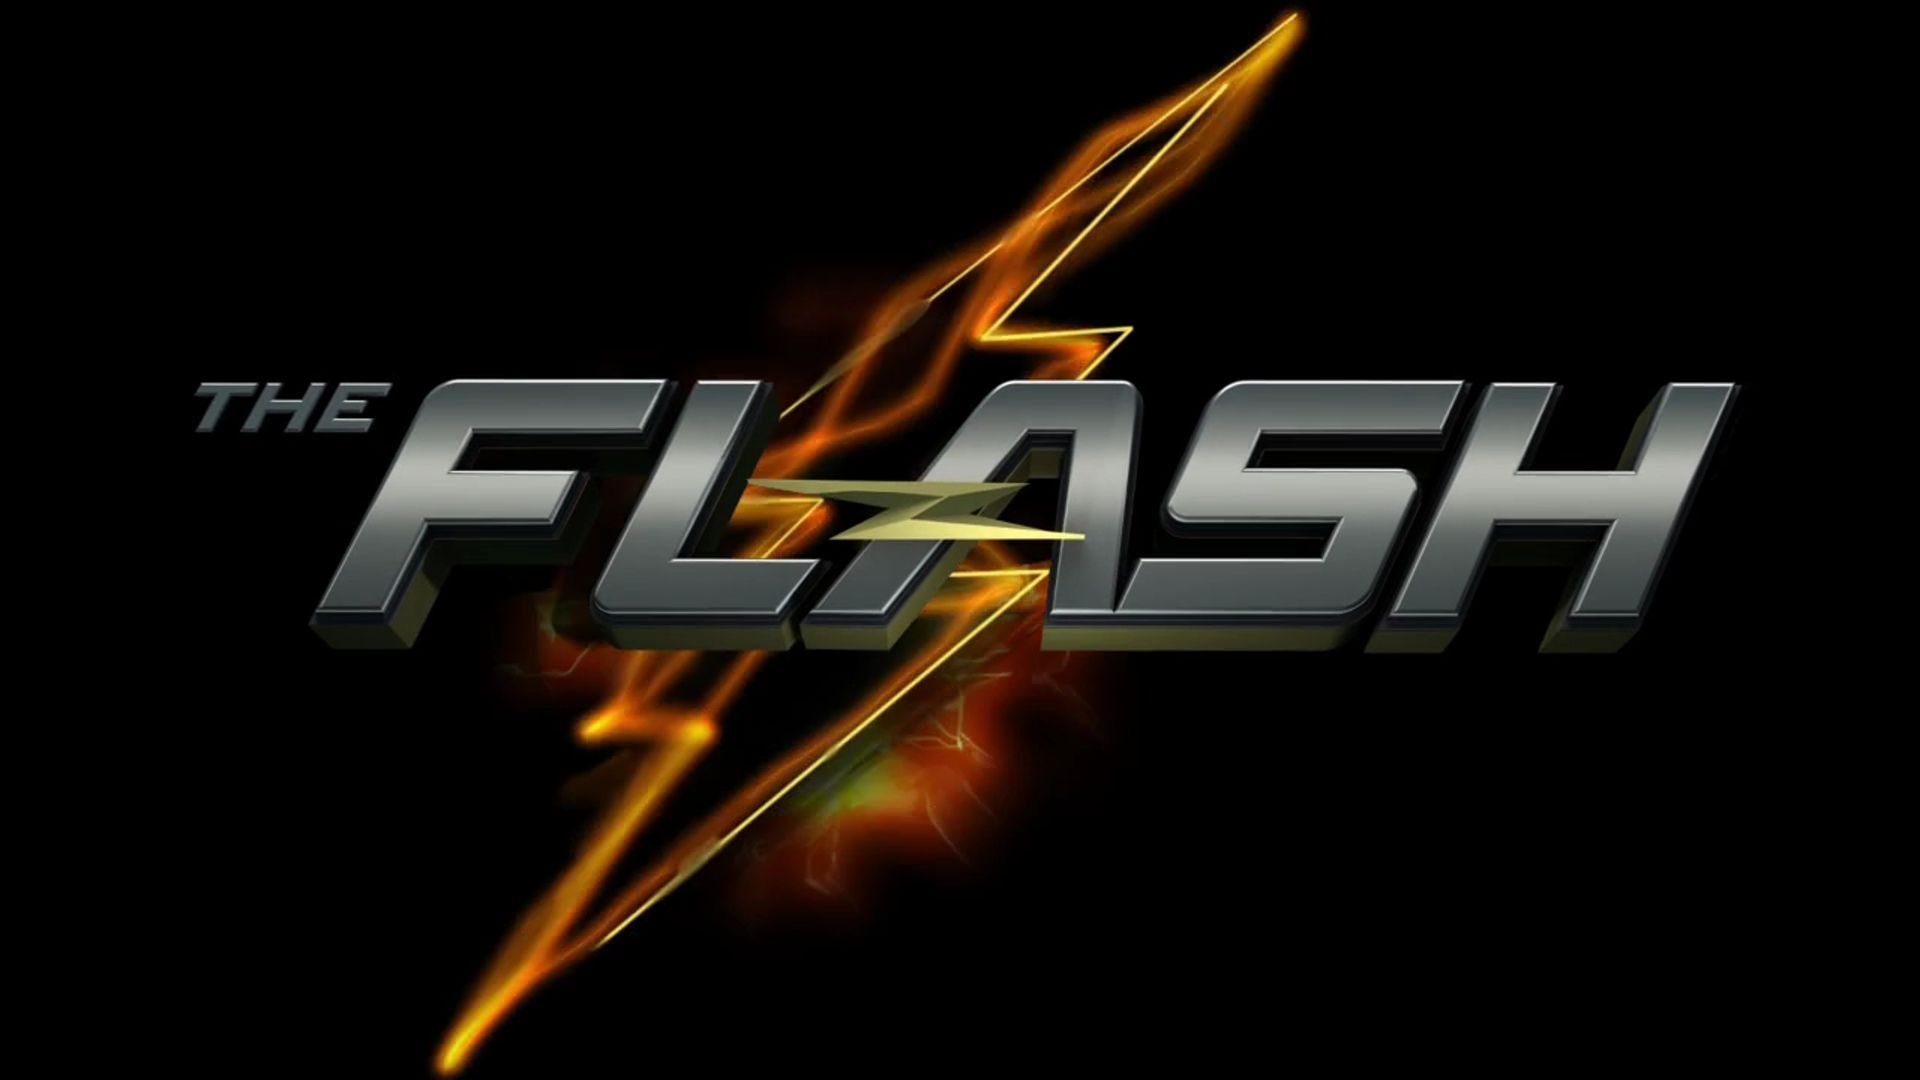 Wallpapers of the Flash - In high resolutions